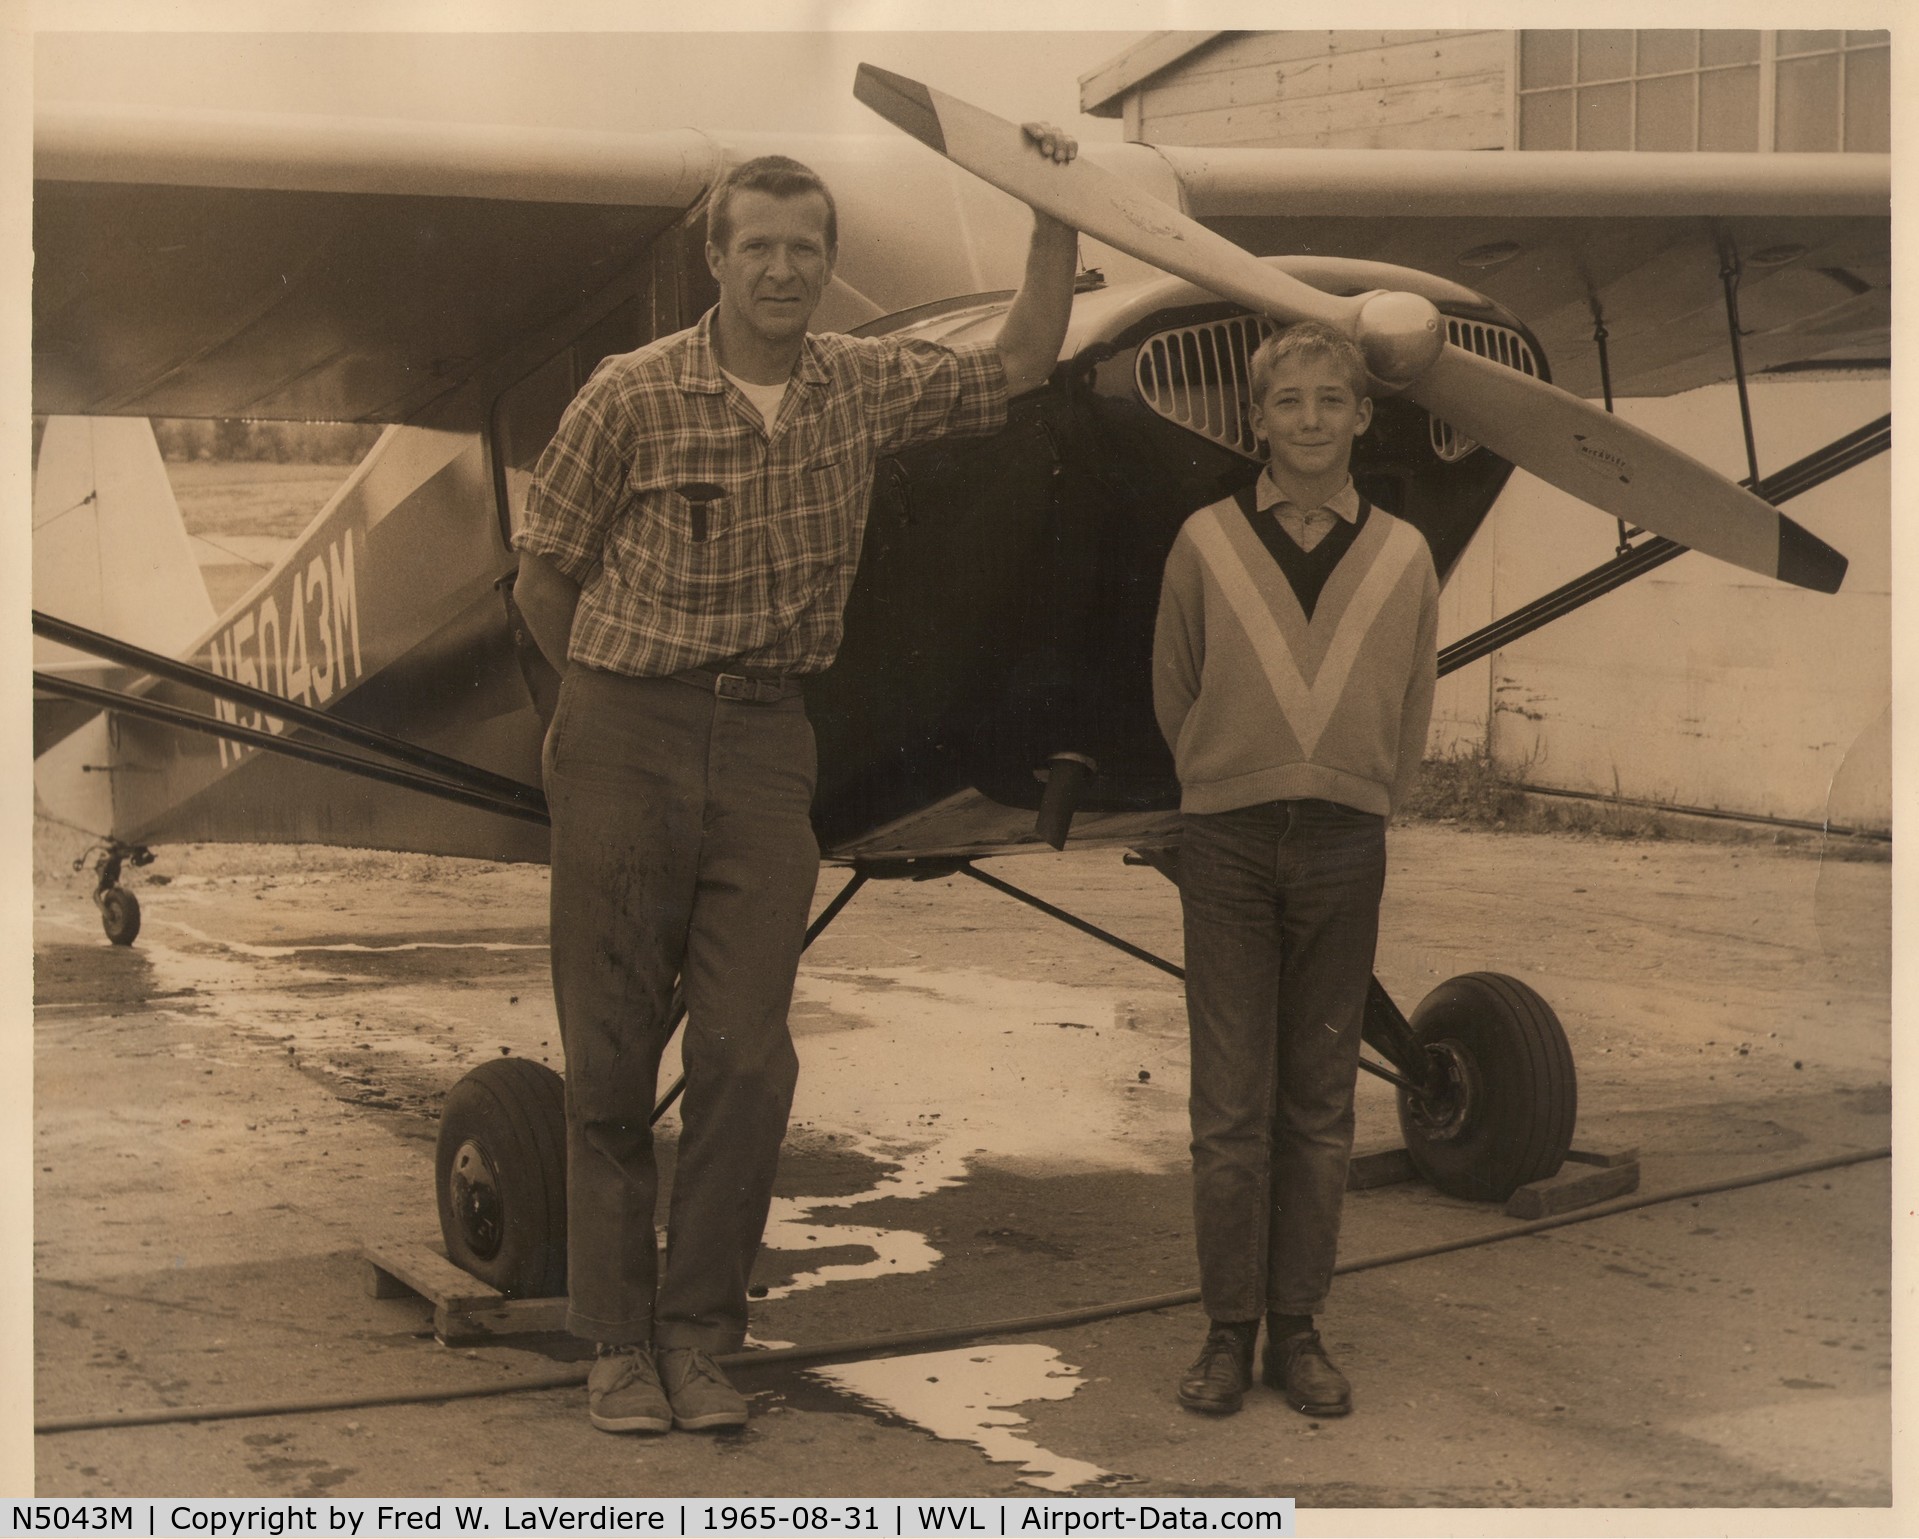 N5043M, 1946 Taylorcraft BC-12D-85 Sportsman C/N 10343, (Left-to-right:) Gerald L. Robbins, Stephen L. Robbins. Stamped on back: “Date AUG 31 1965; Neg. no. 1; Photo by Fred W. LaVerdiere, Waterville, Maine”. With Gerry’s 1946 Taylorcraft at Waterville Robert Lafleur Airport in Waterville, Maine.